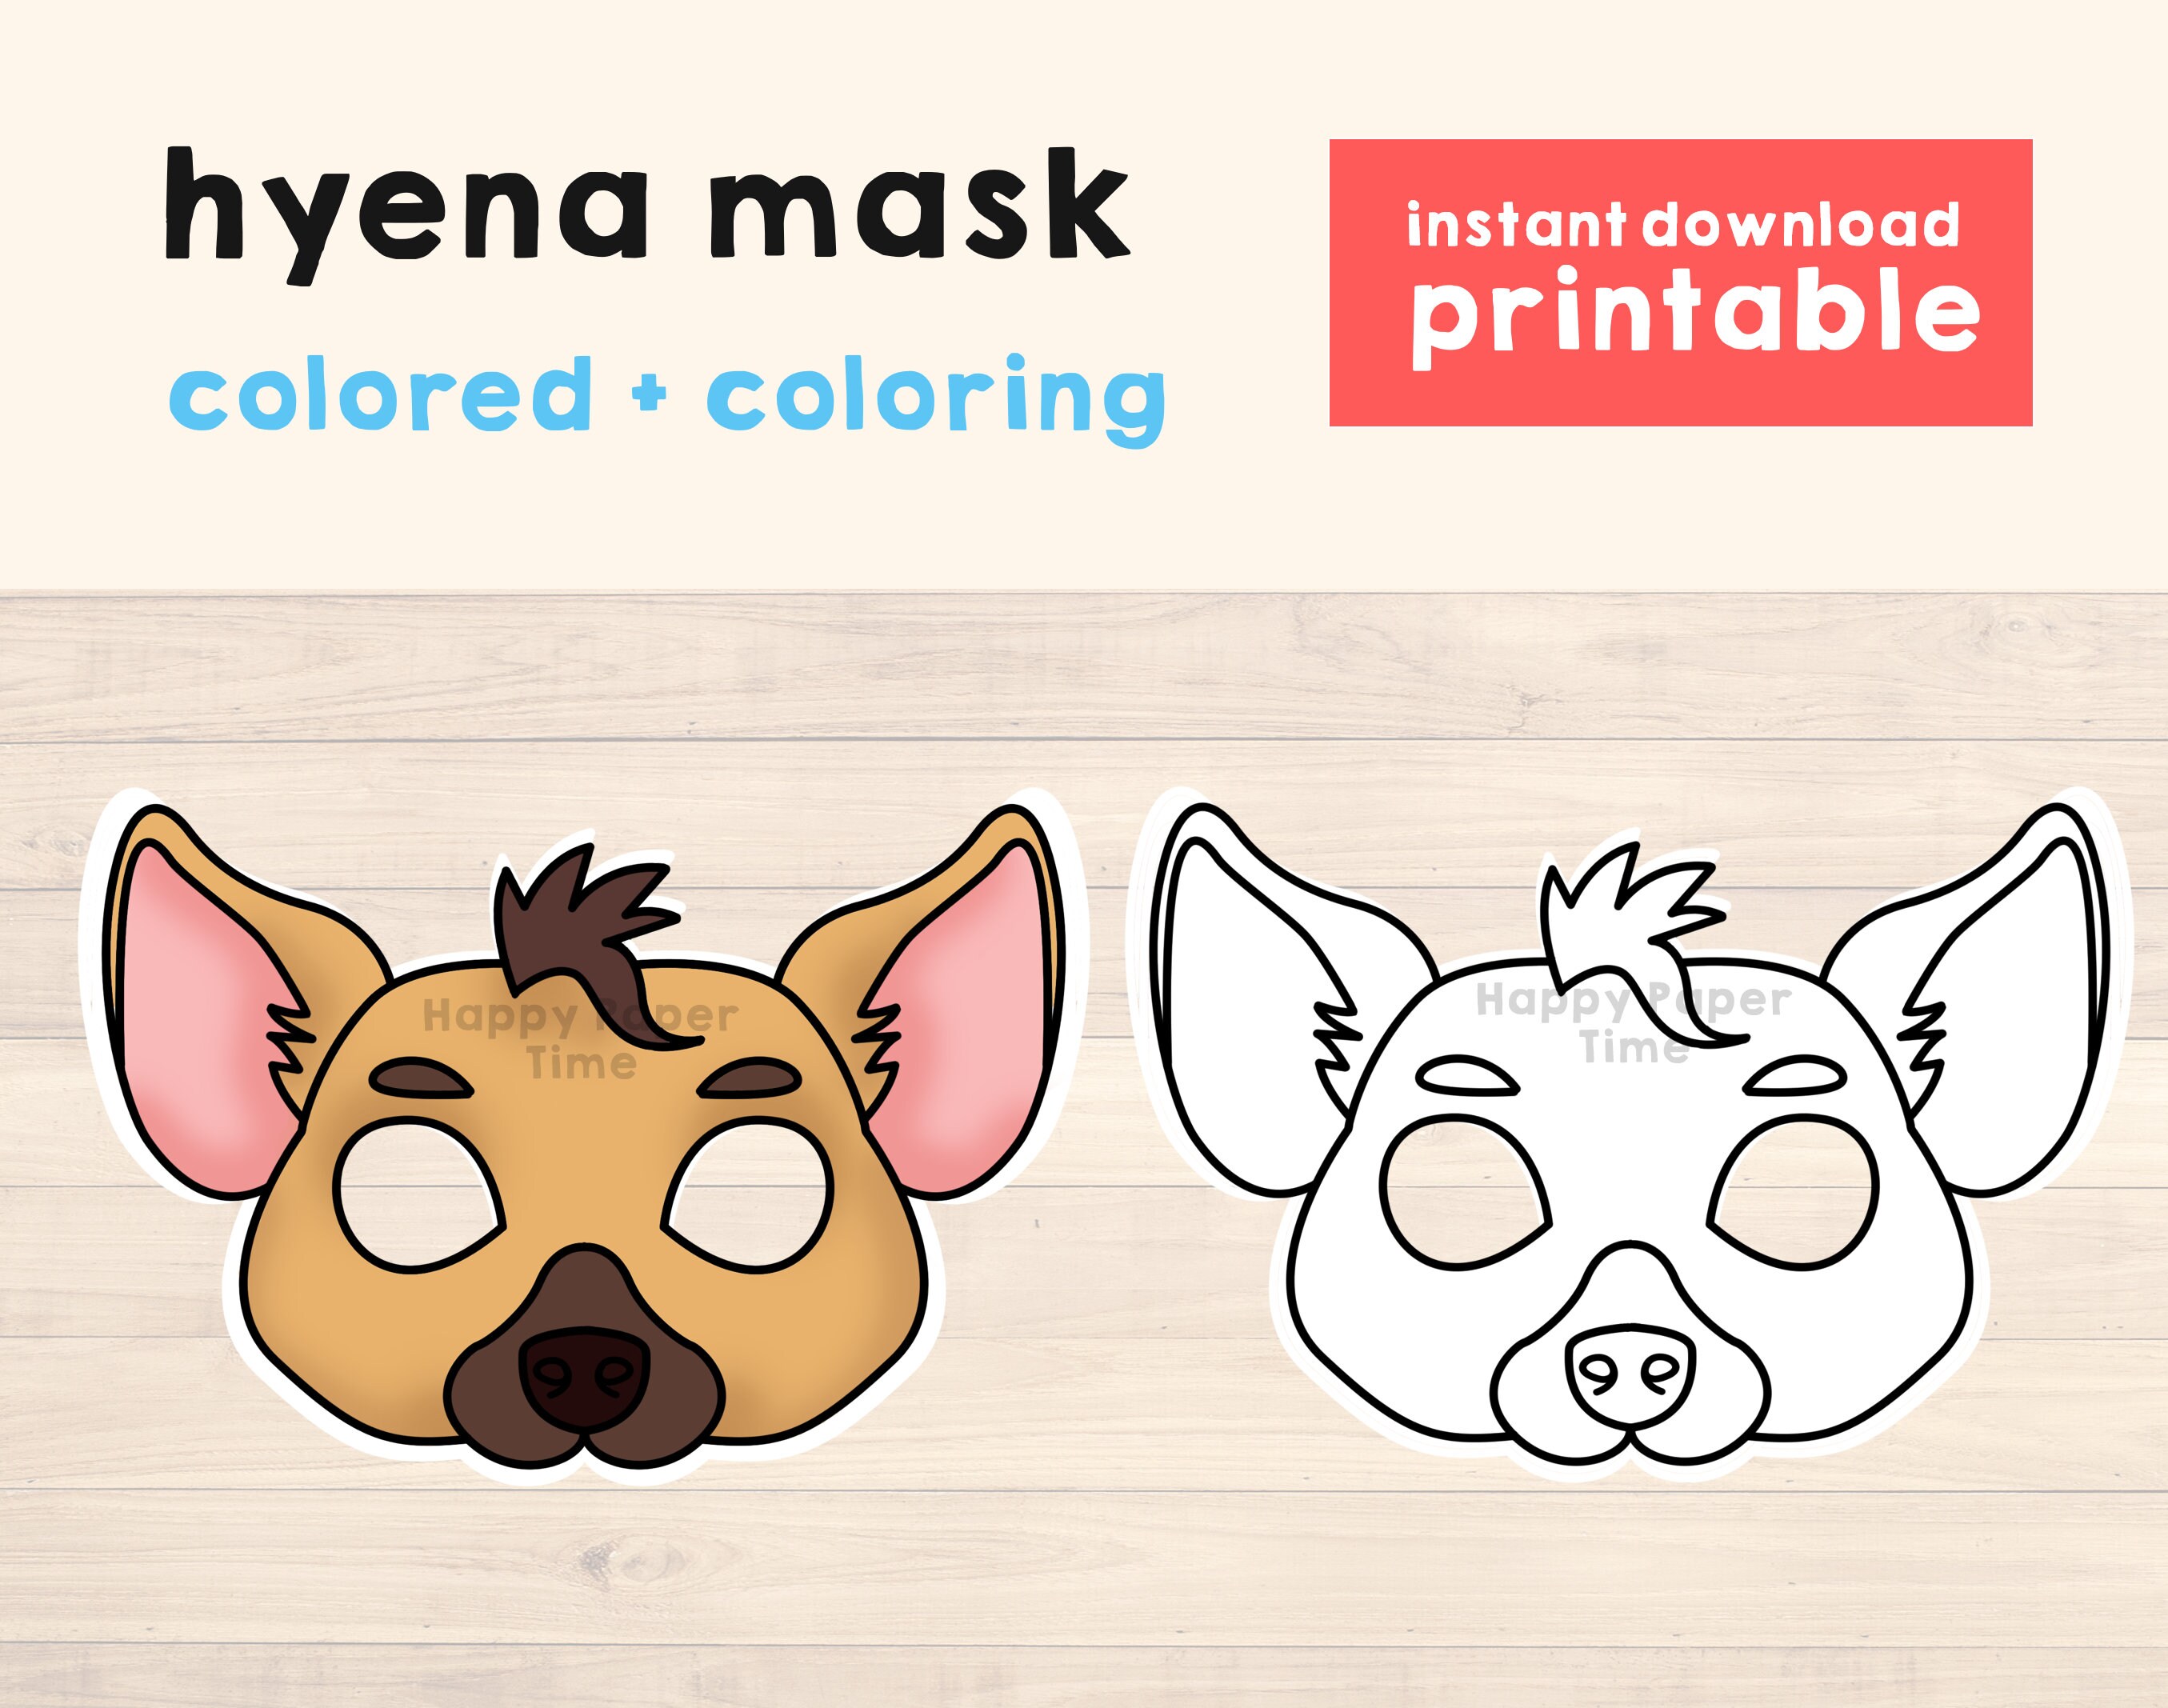 Hyena mask costume animal mask printable party favor african jungle party printable mask kids party favor printable instant download